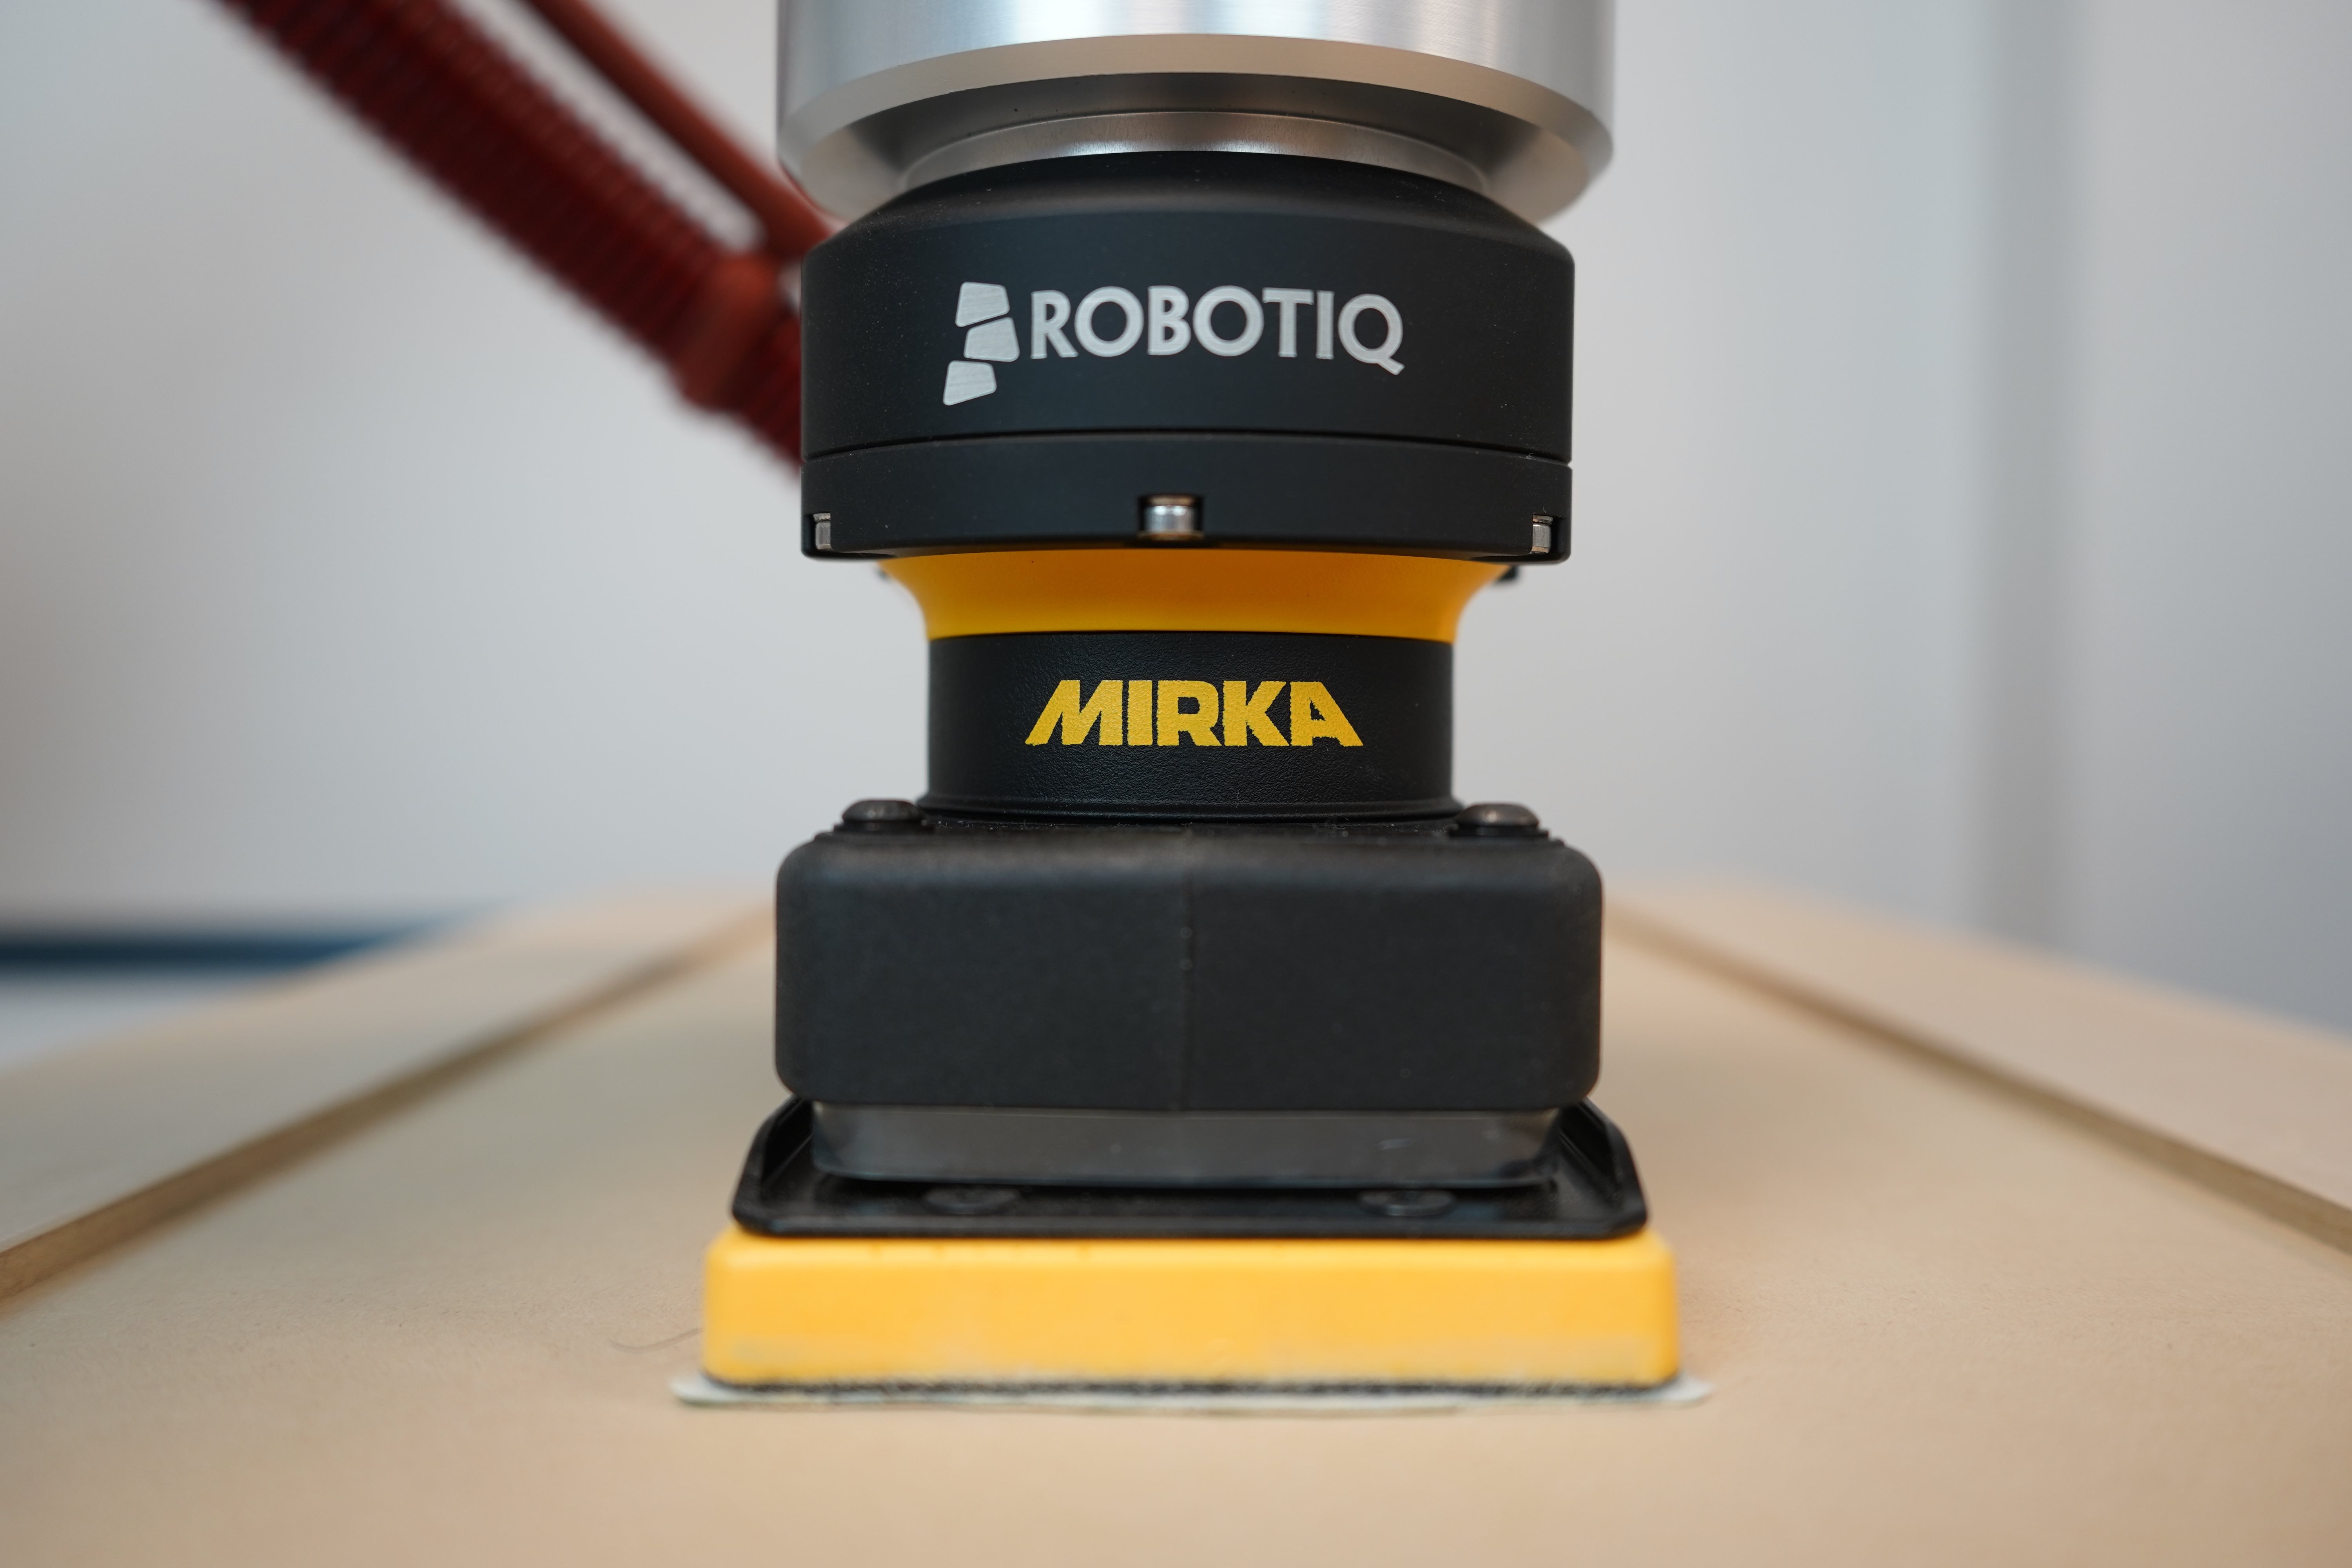 How to Use Mirka Tools With a Robot